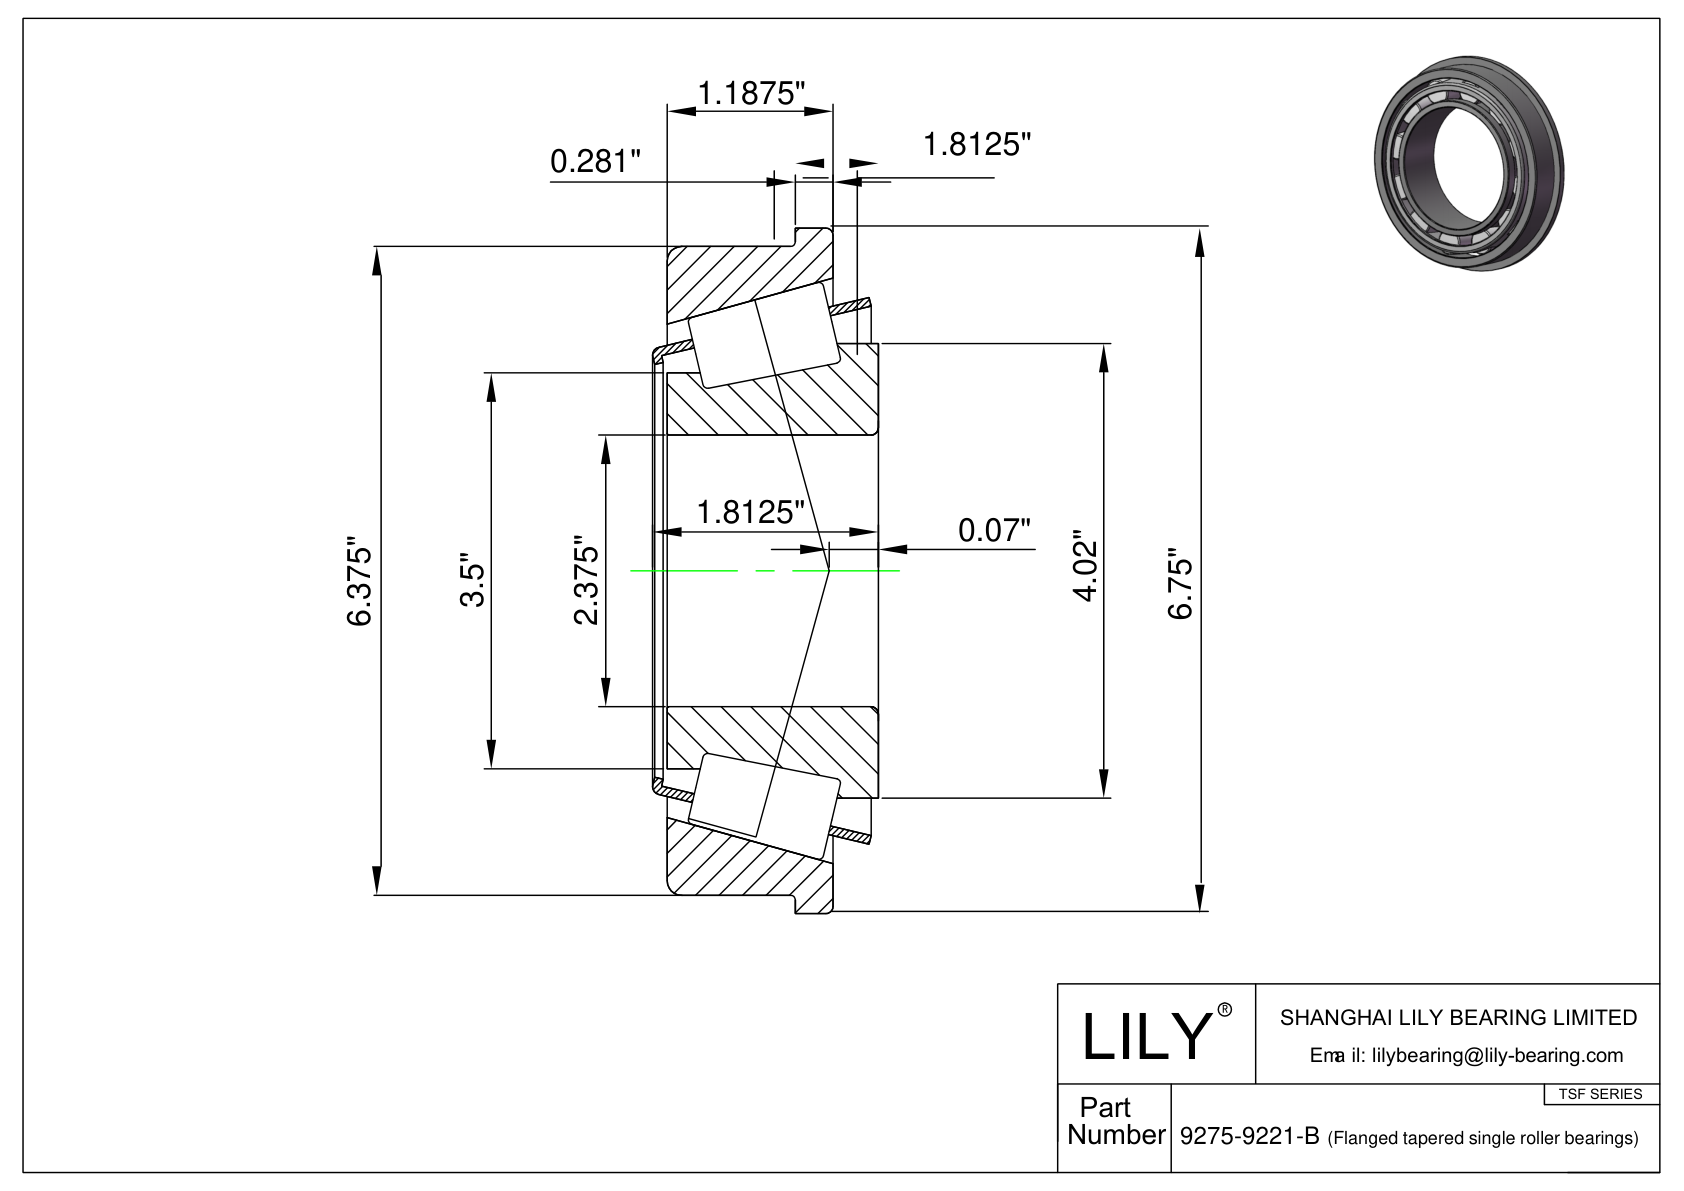 9275-9221-B TSF (Tapered Single Roller Bearings with Flange) (Imperial) cad drawing